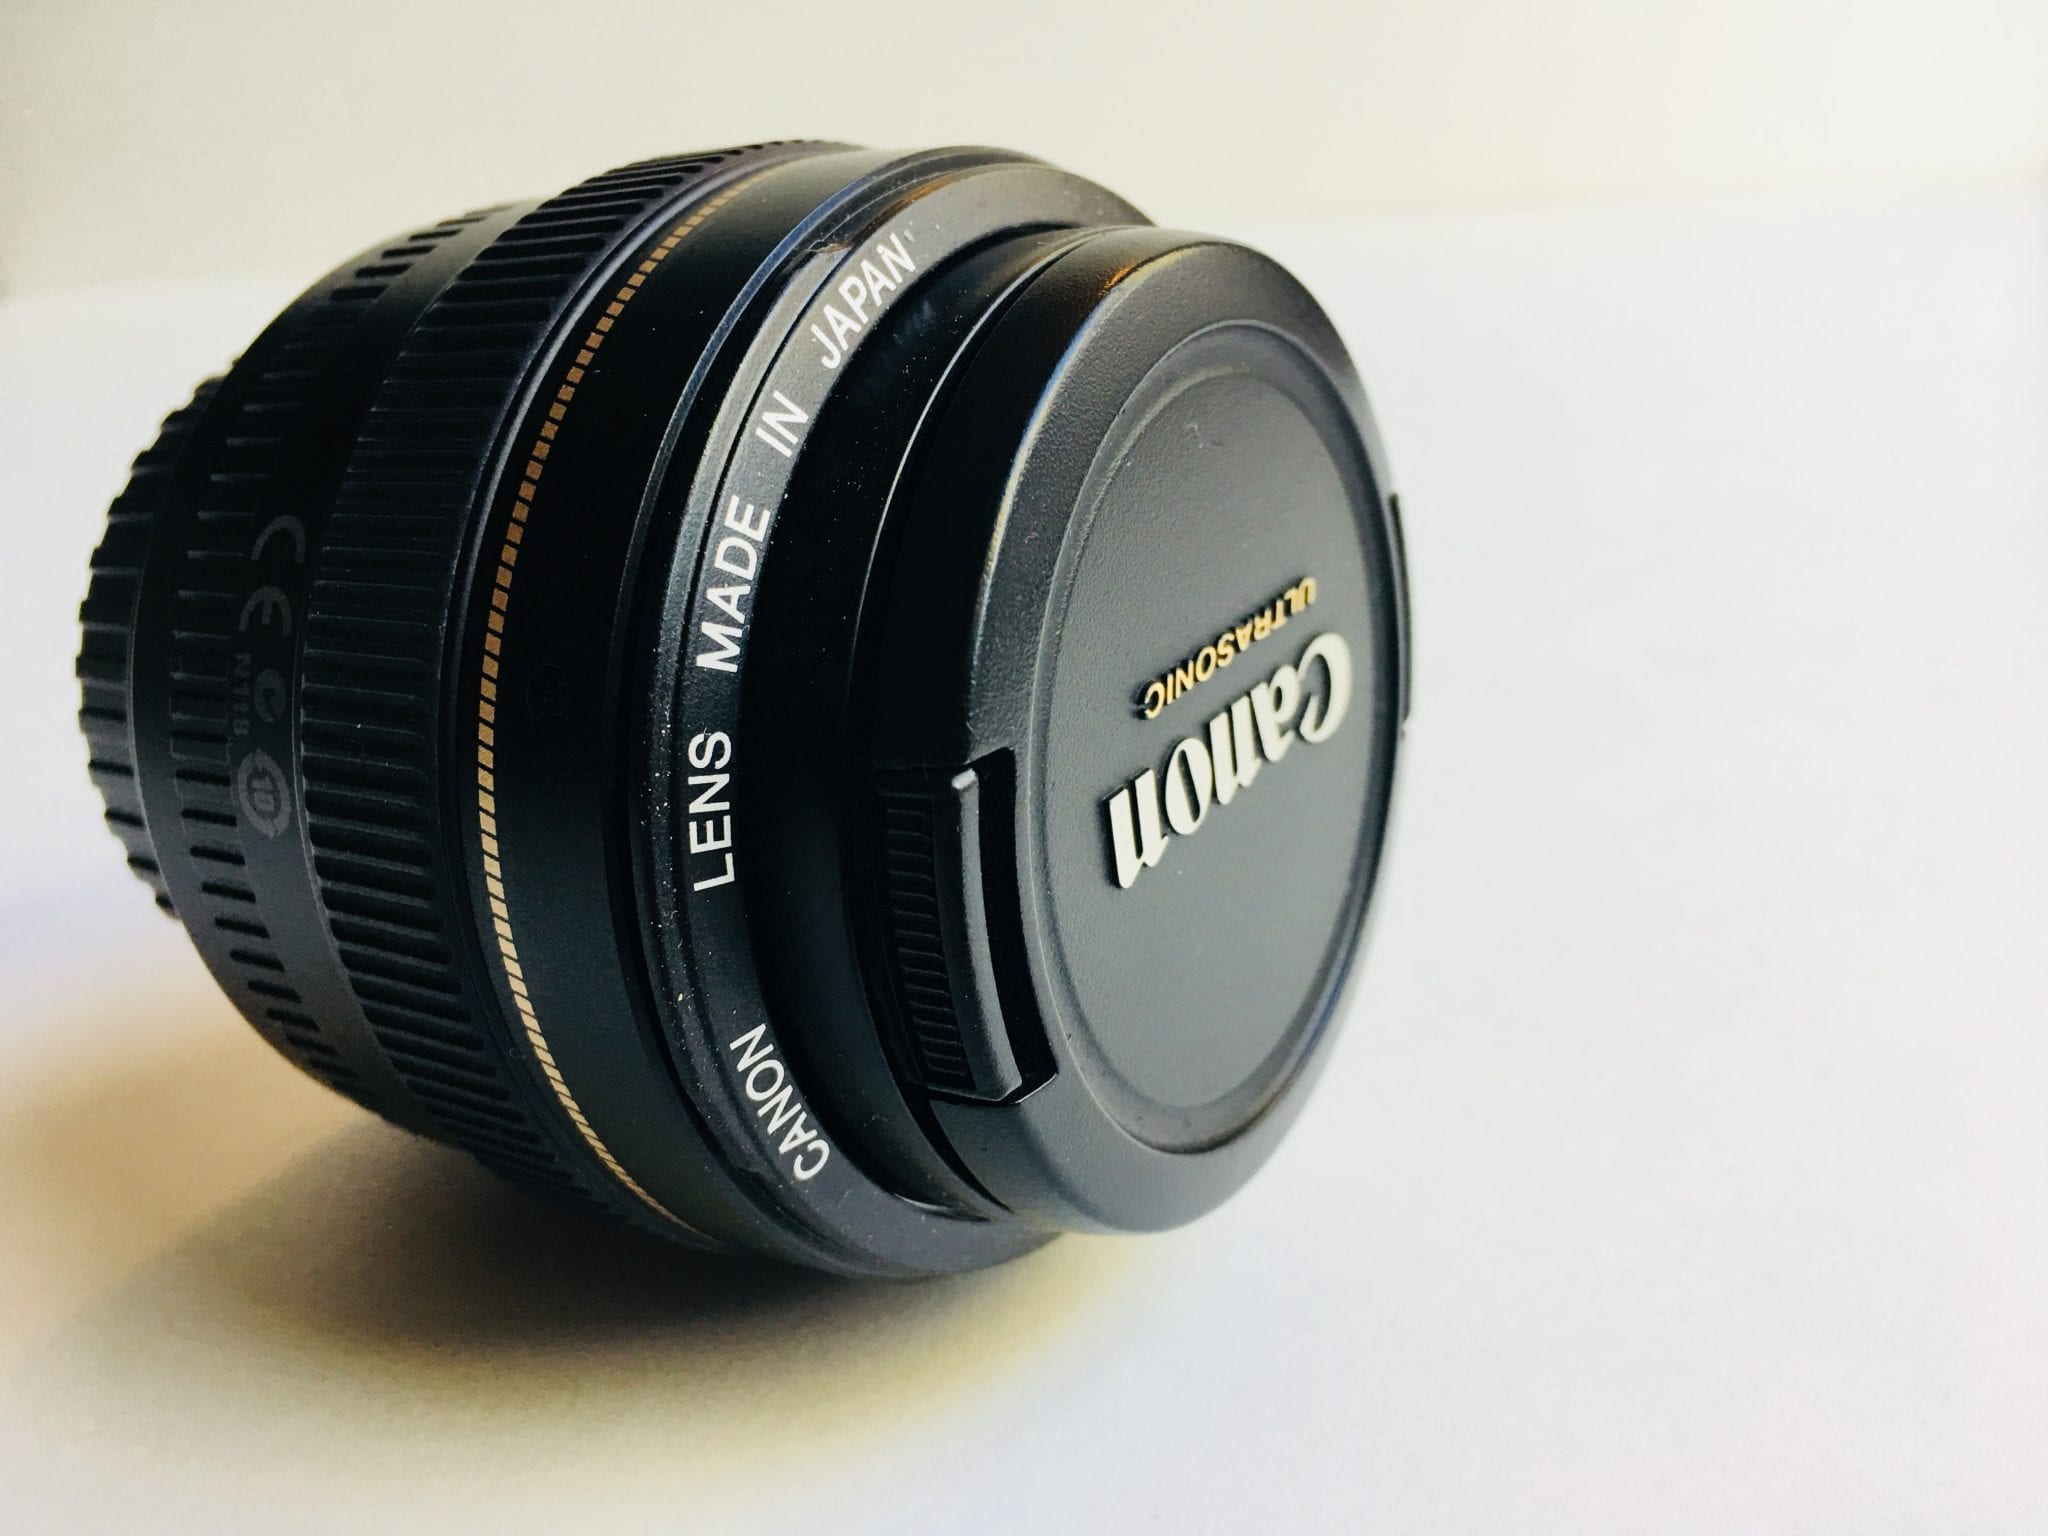 Is the Canon 50mm 1.4 lens right for you?